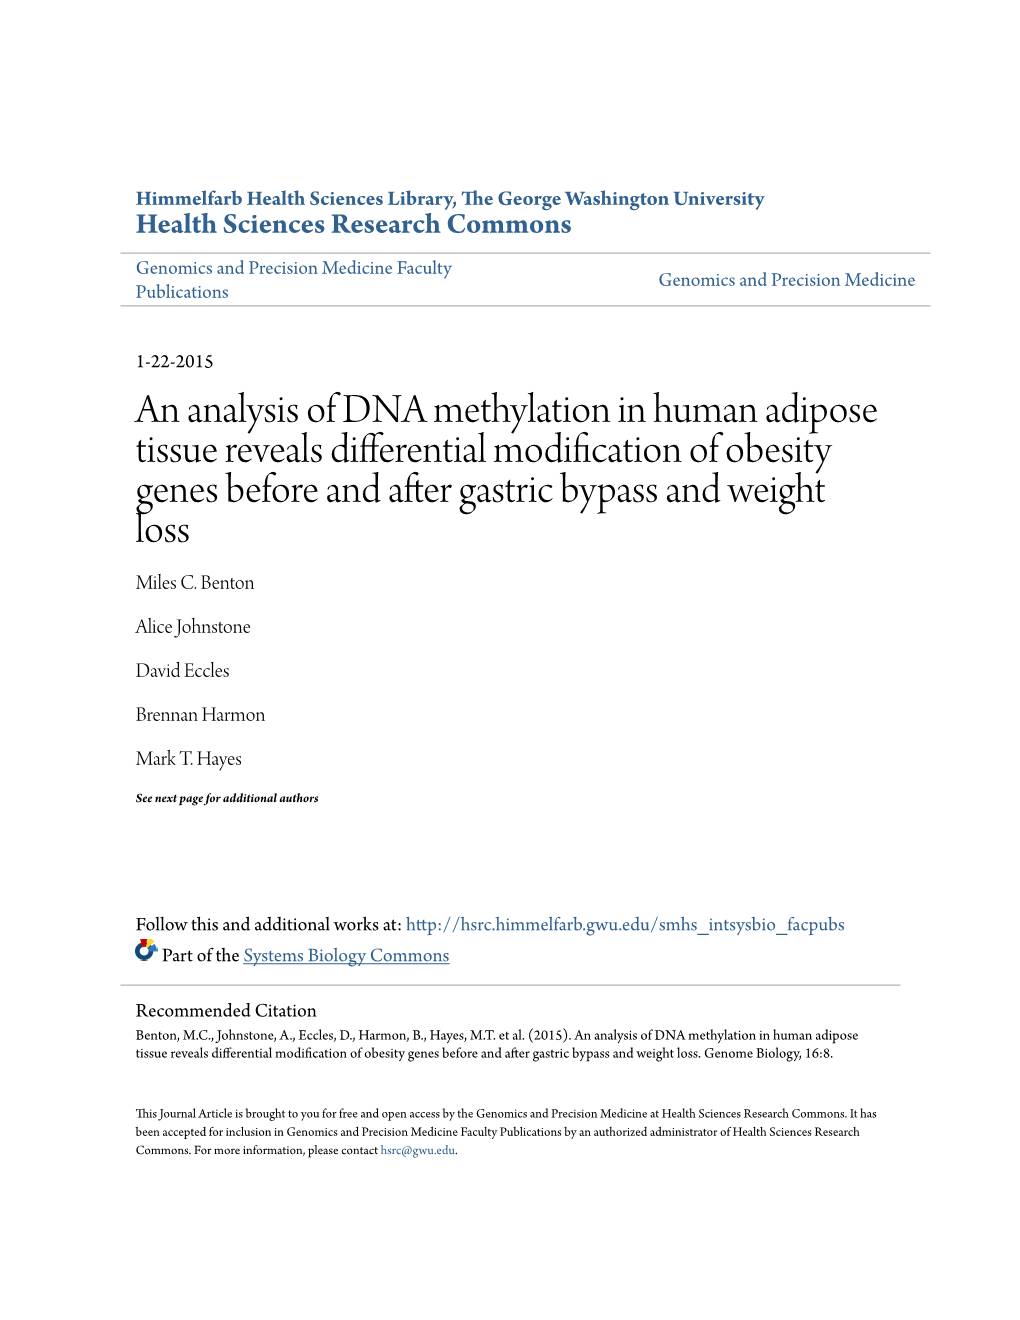 An Analysis of DNA Methylation in Human Adipose Tissue Reveals Differential Modification of Obesity Genes Before and After Gastric Bypass and Weight Loss Miles C